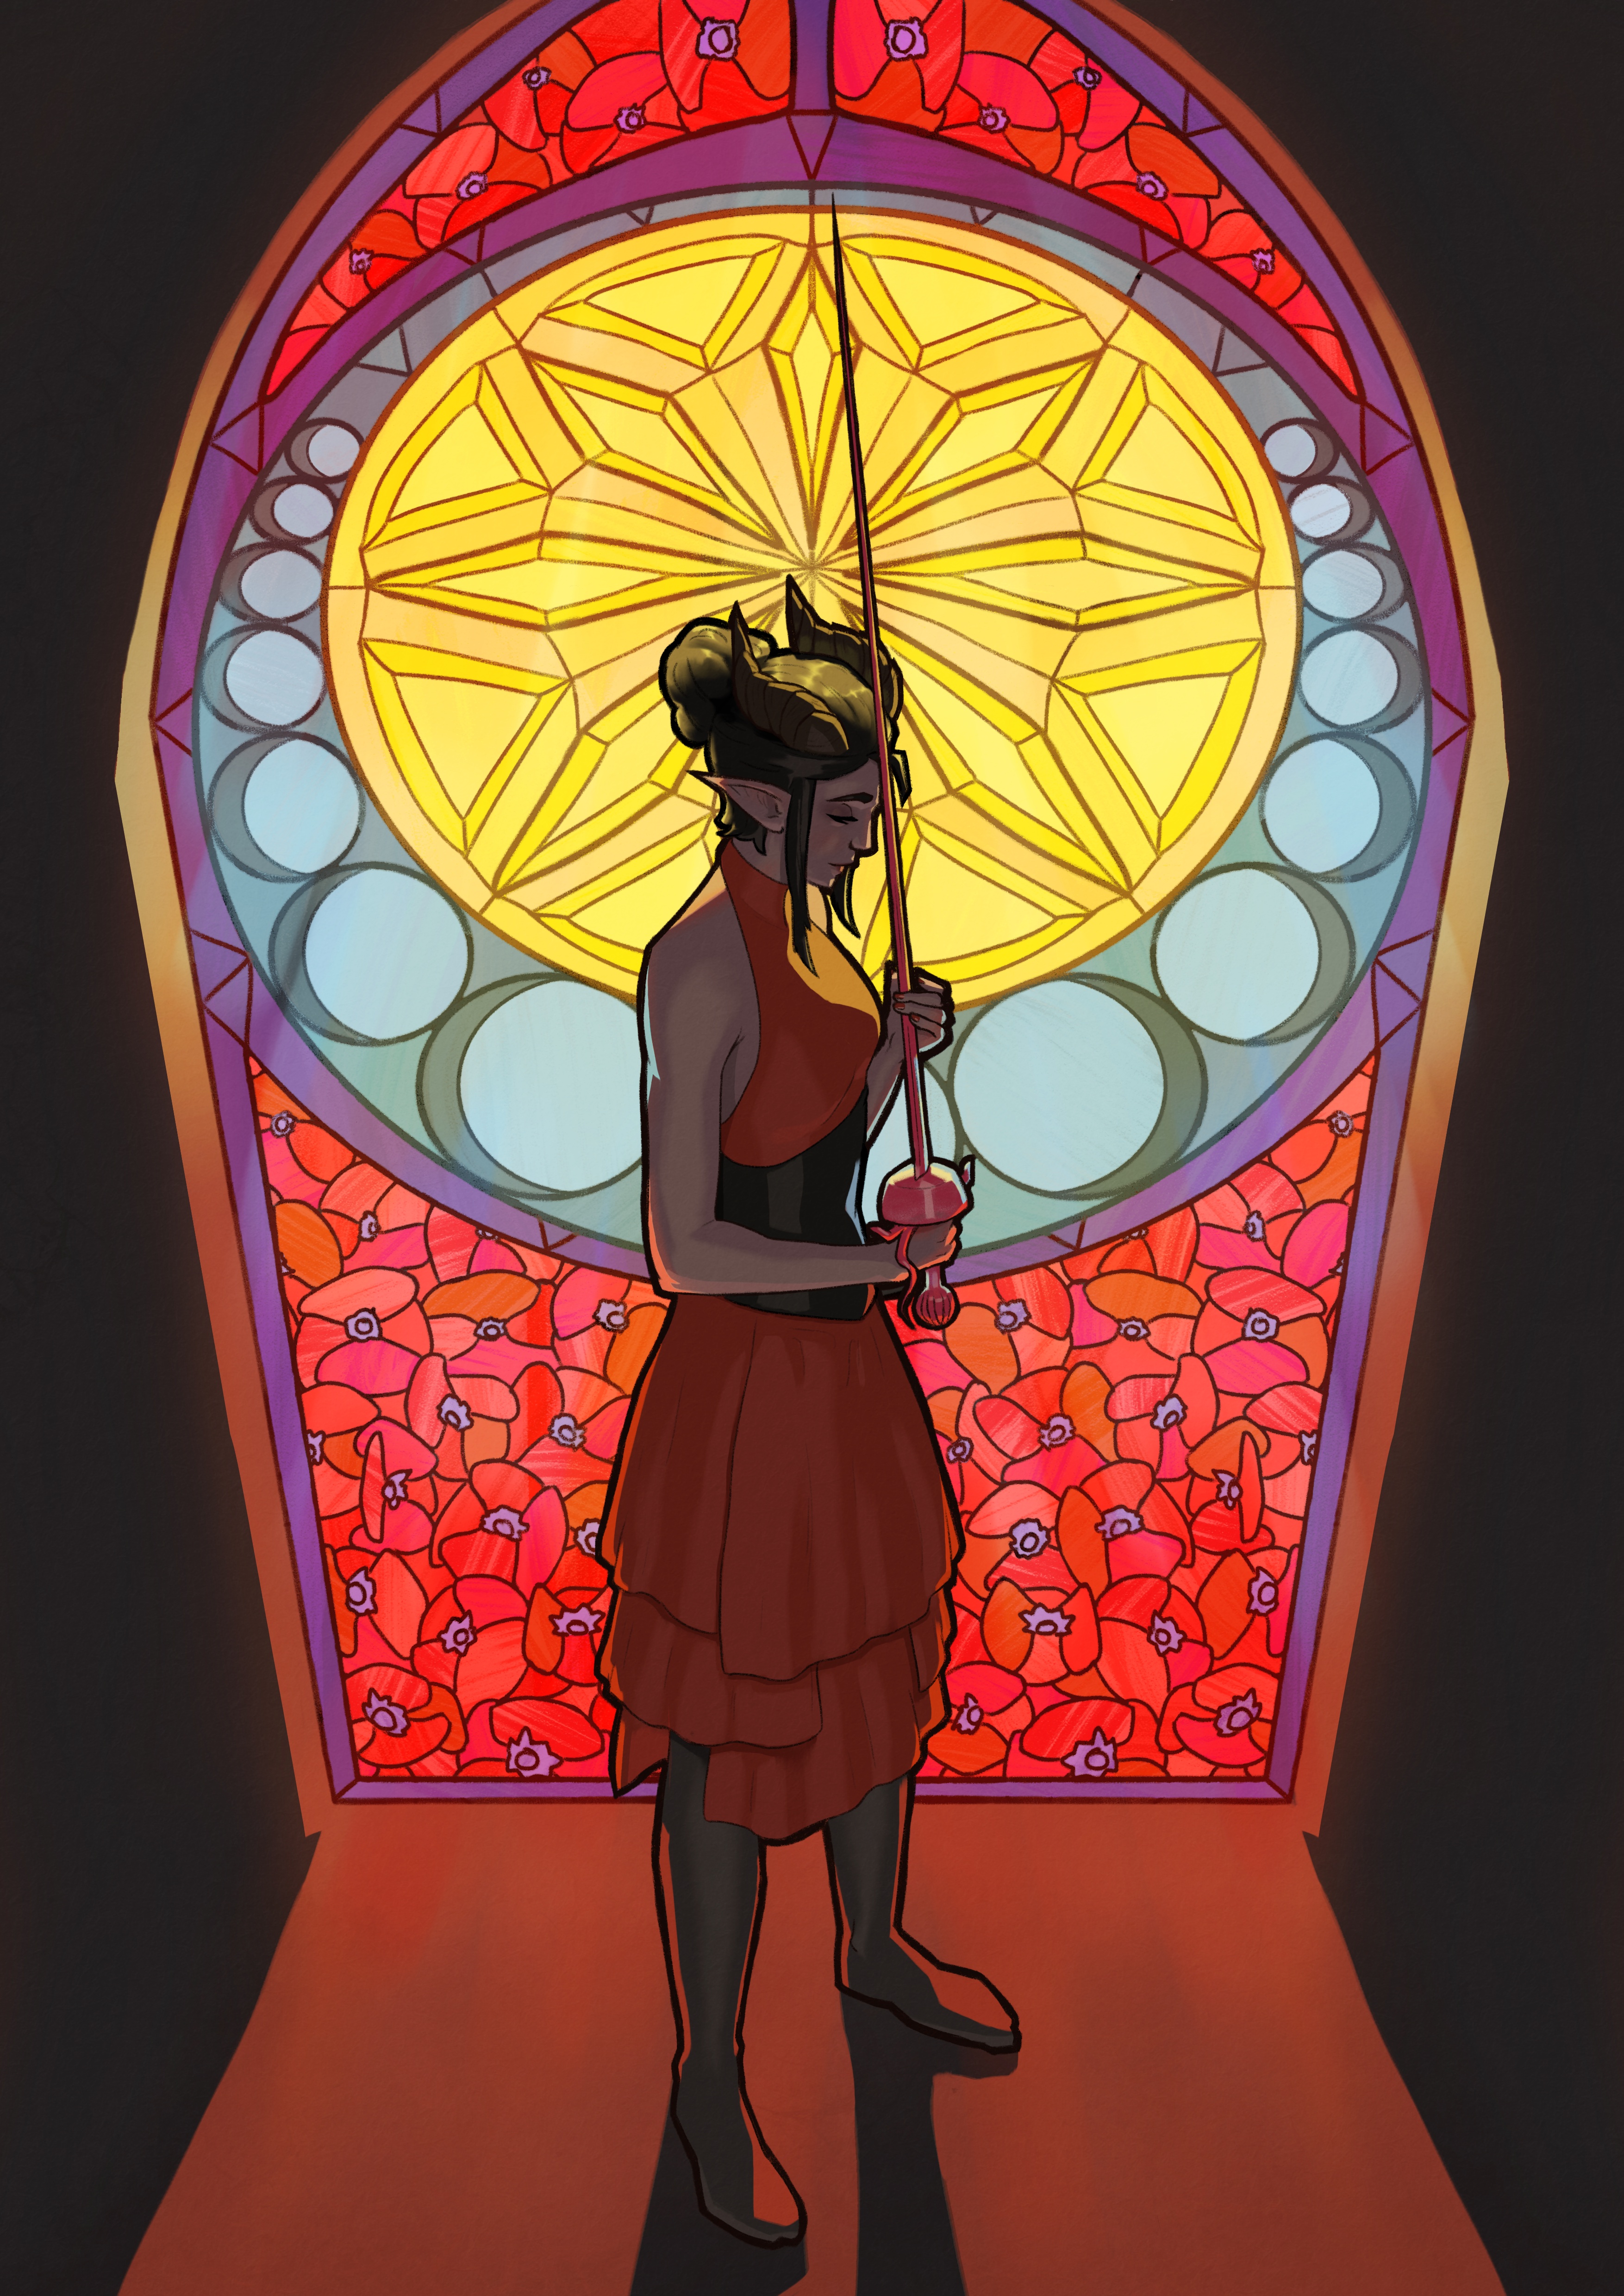 A digital painting featuring a large and brightly lit
gothic-style stained glass window in an otherwise dark room. The bottom half of
the window depicts red poppy flowers, the rest is a circular decorative design.
In front of the window stands a woman wearing a red dress with a black corset.
She has horns on her head, black hair styled into a bun, and she's holding a
pink glass rapier in front of her face, looking down at it.